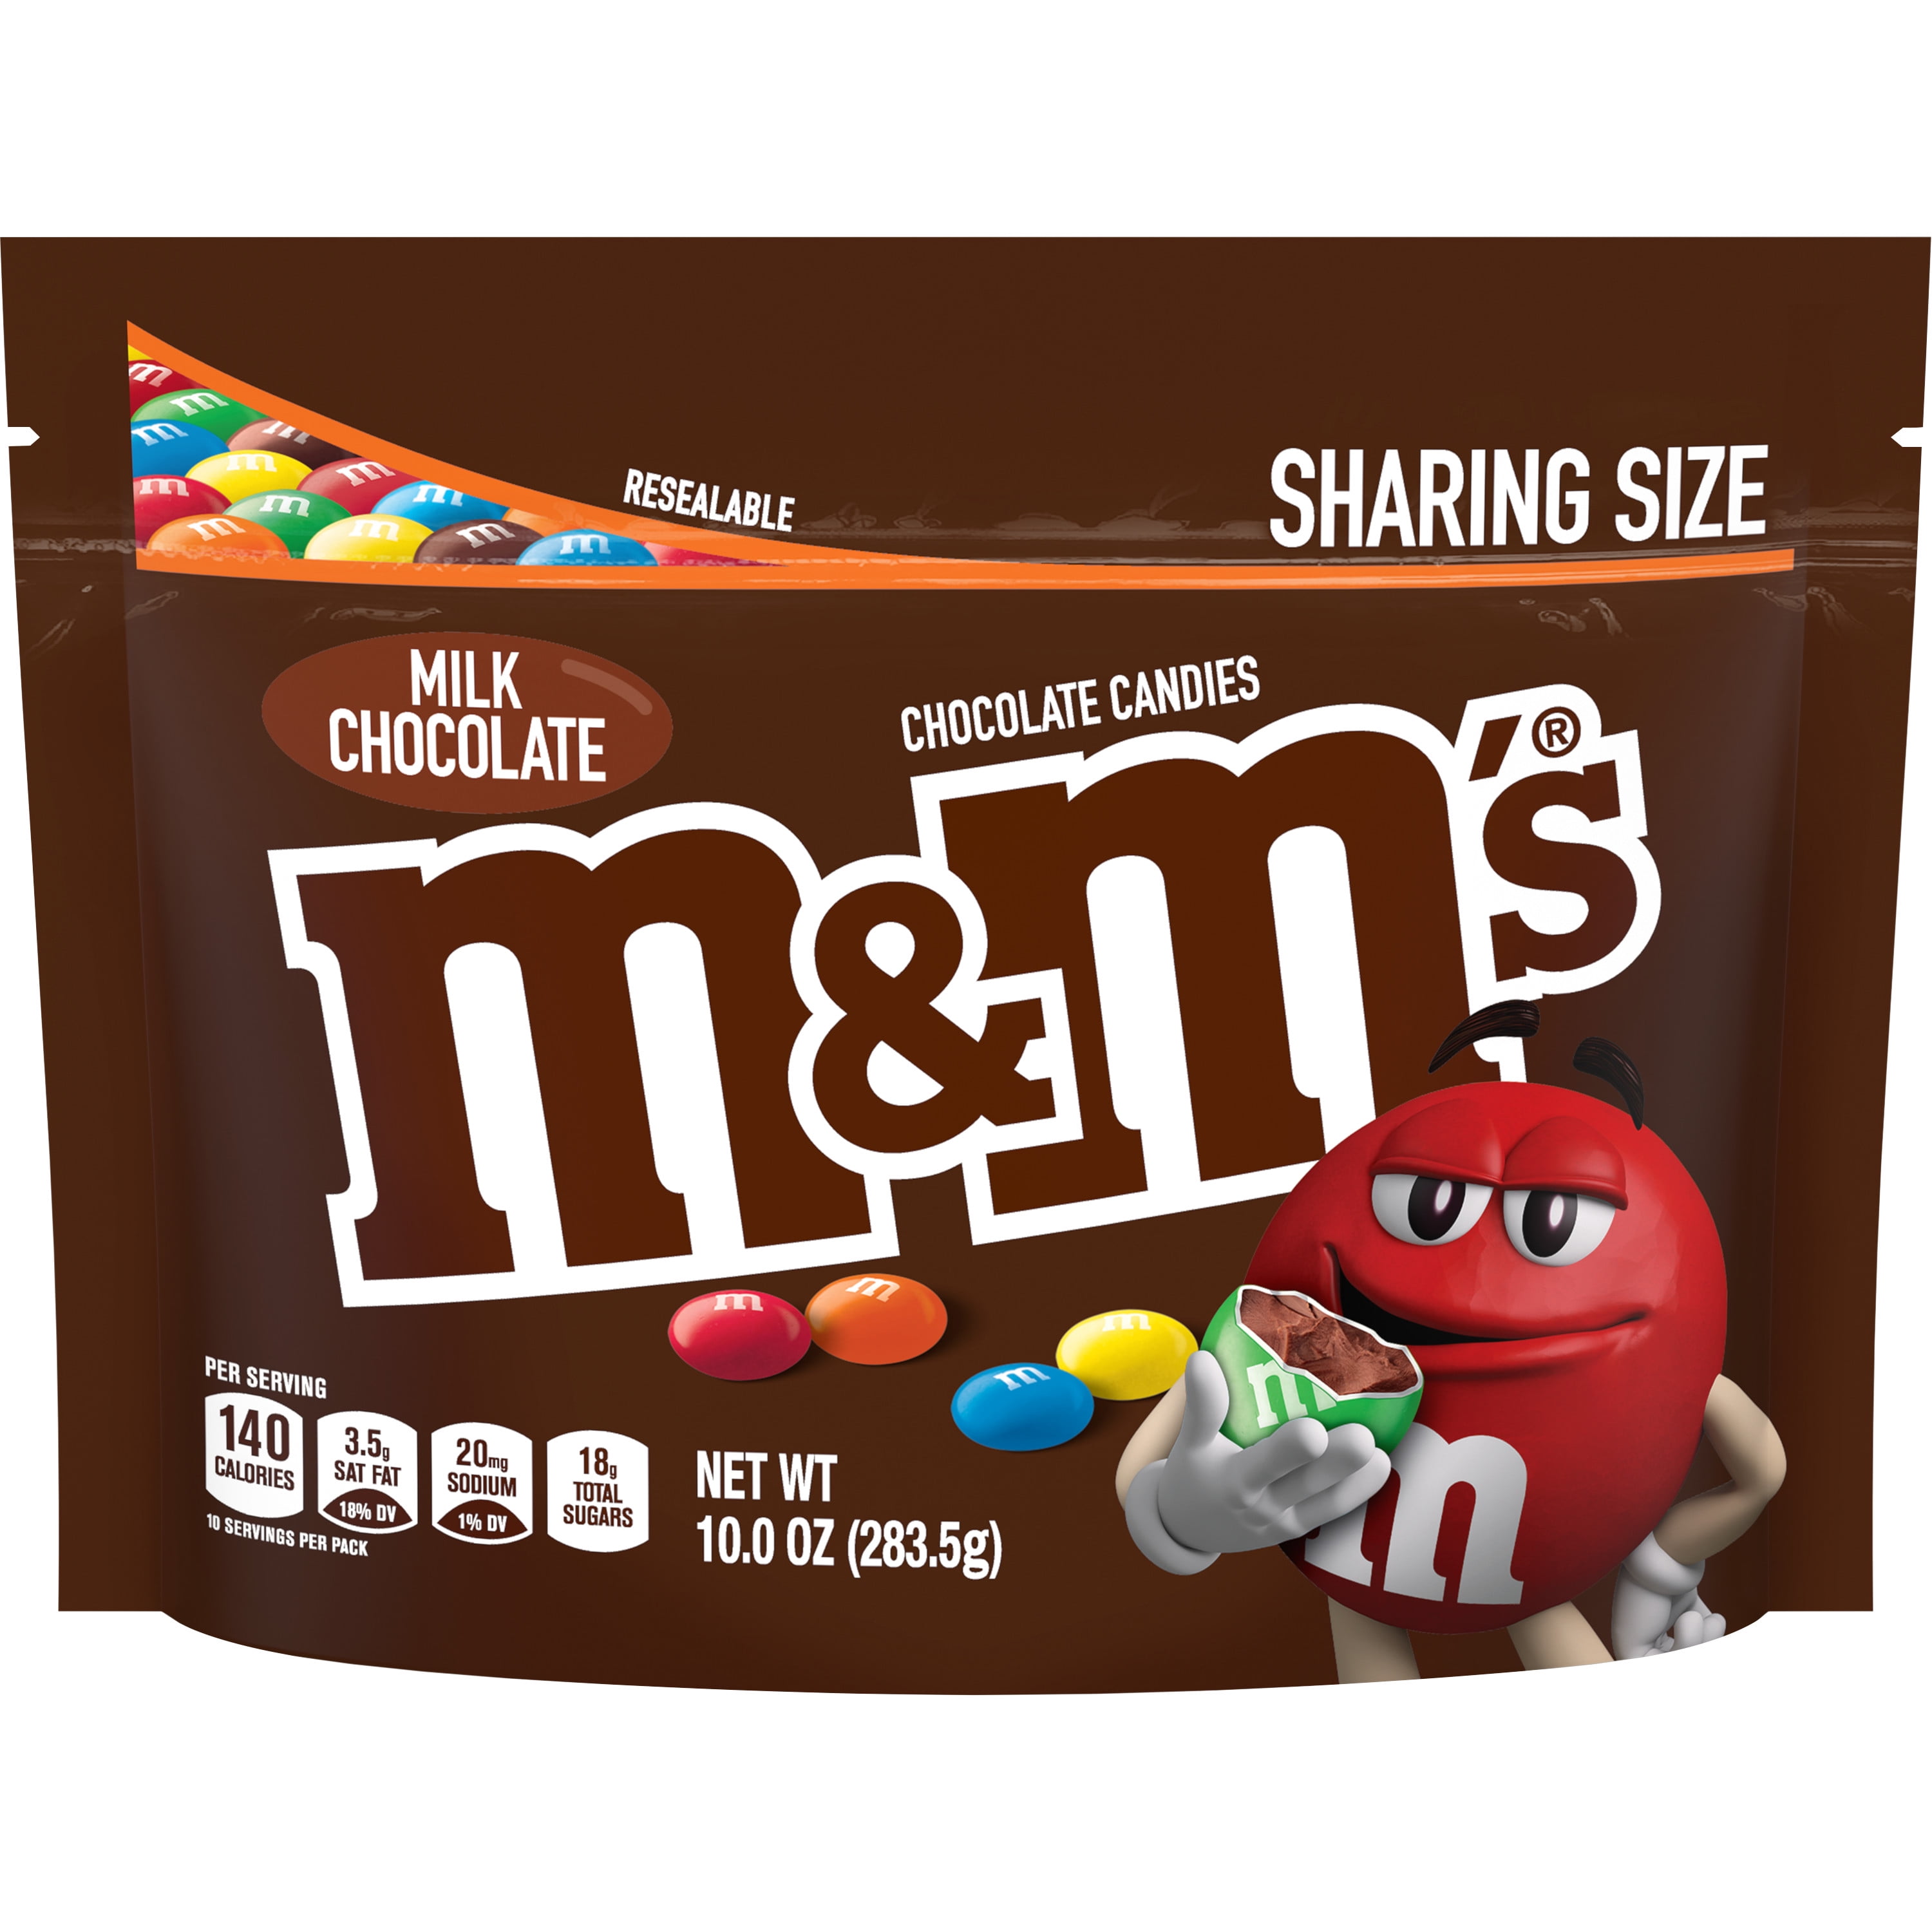 M&M'S Milk Chocolate Snack Mix Sweet & Salty Sharing Size 7.7 Ounce Pouch, Packaged Candy